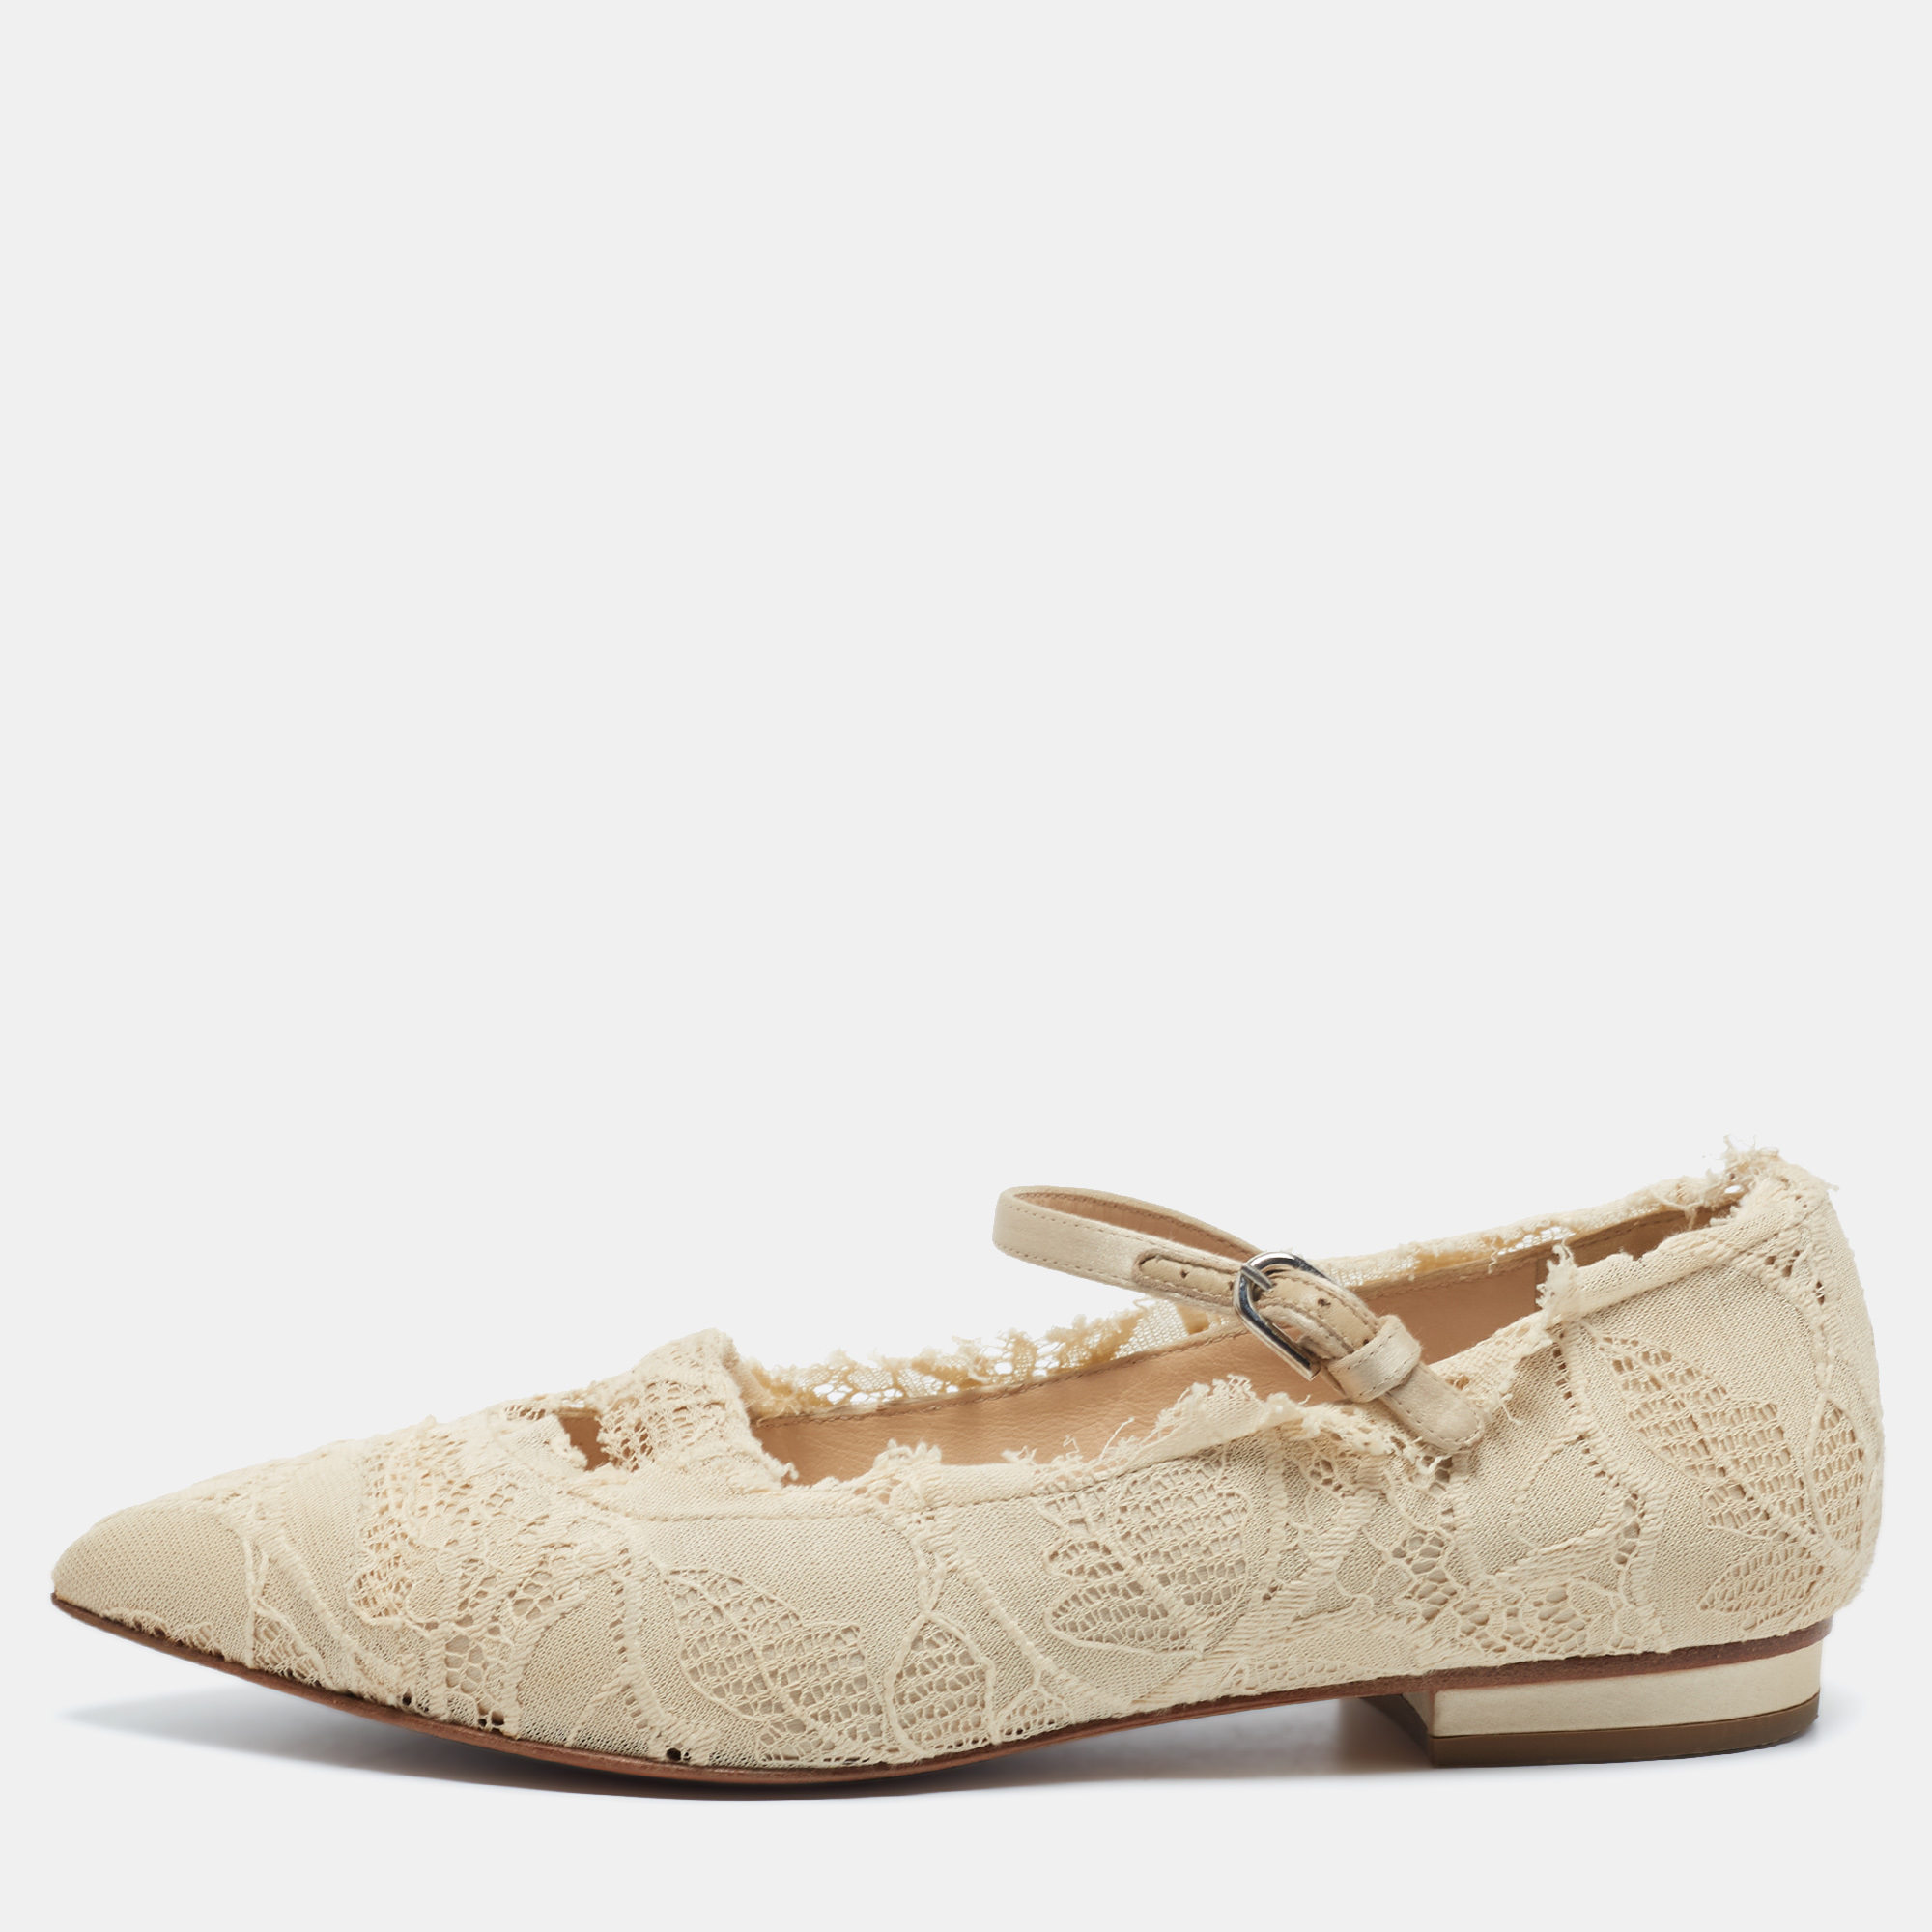 Chanel Beige Lace Pointed Toe Ballet Flats Size 37.5